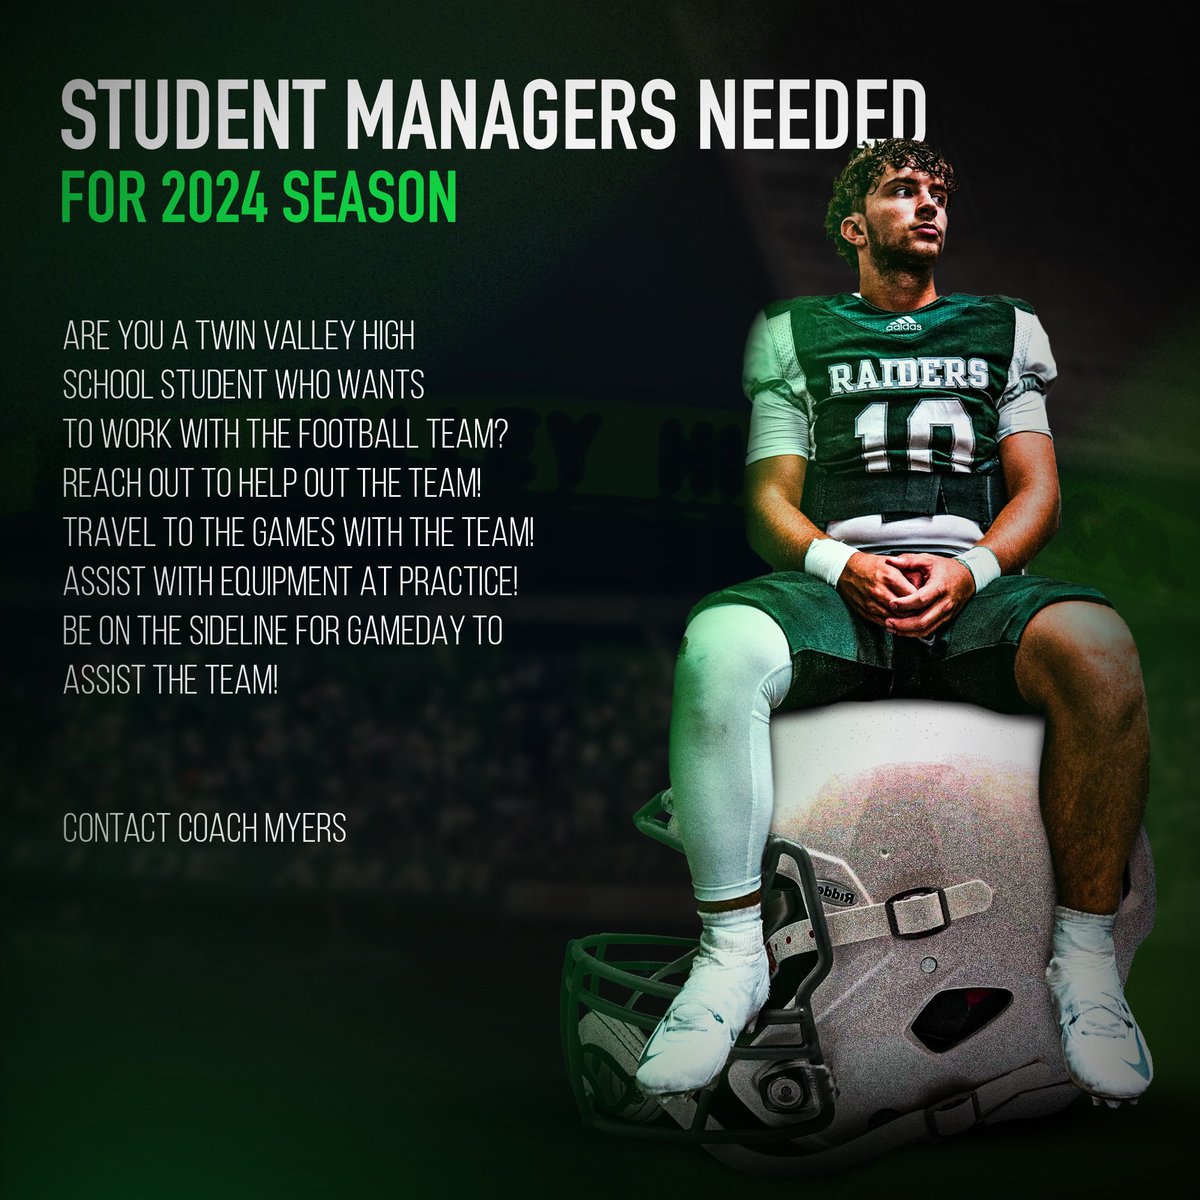 Interested in being a student manager for the football team for the 2024 season? Here’s your opportunity!! Reach out to Coach Myers! Must be a TVHS student for the 2024 season! #TPW #4TheValley